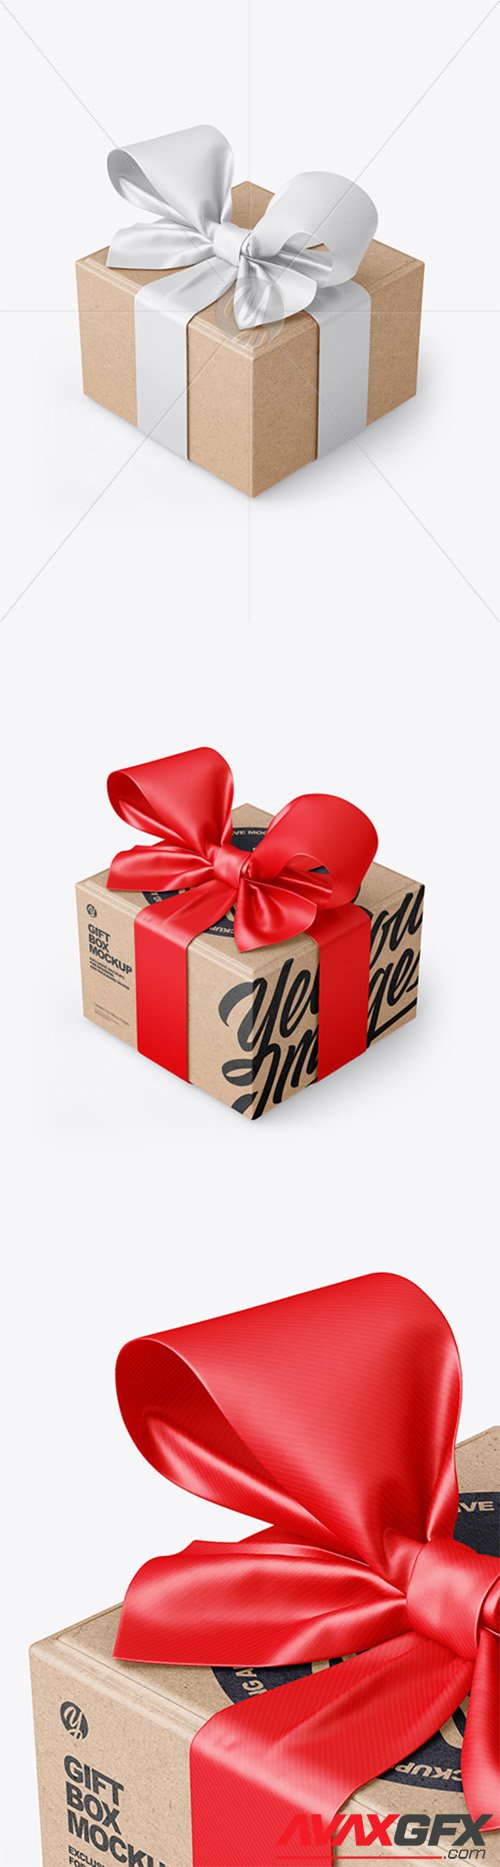 Kraft Paper Gift Box With Tied Bow Mockup 79780